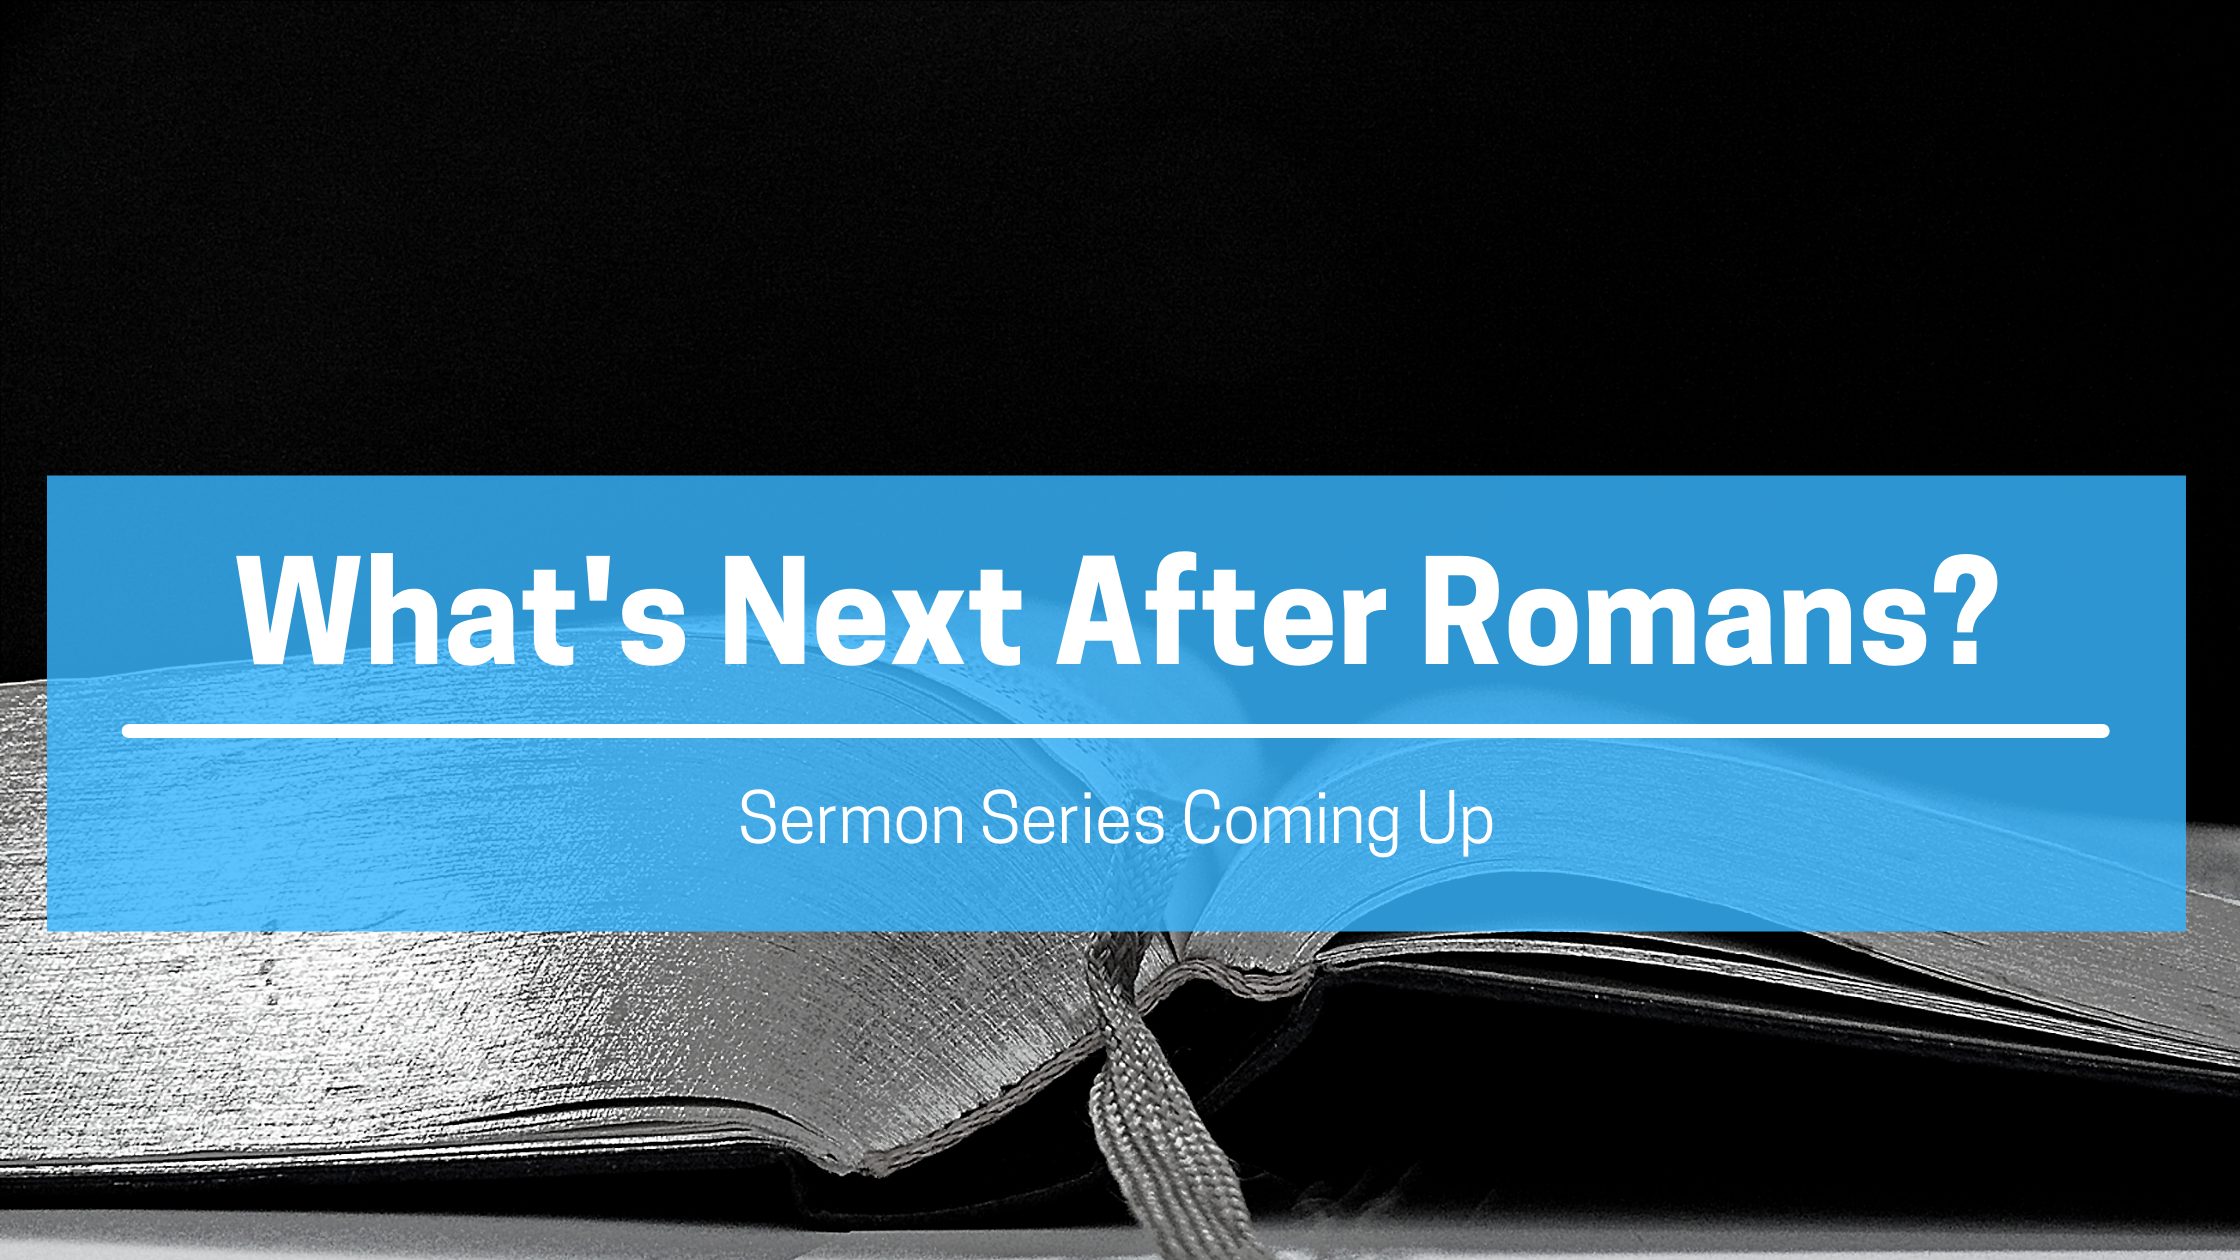 What’s Next After Romans?